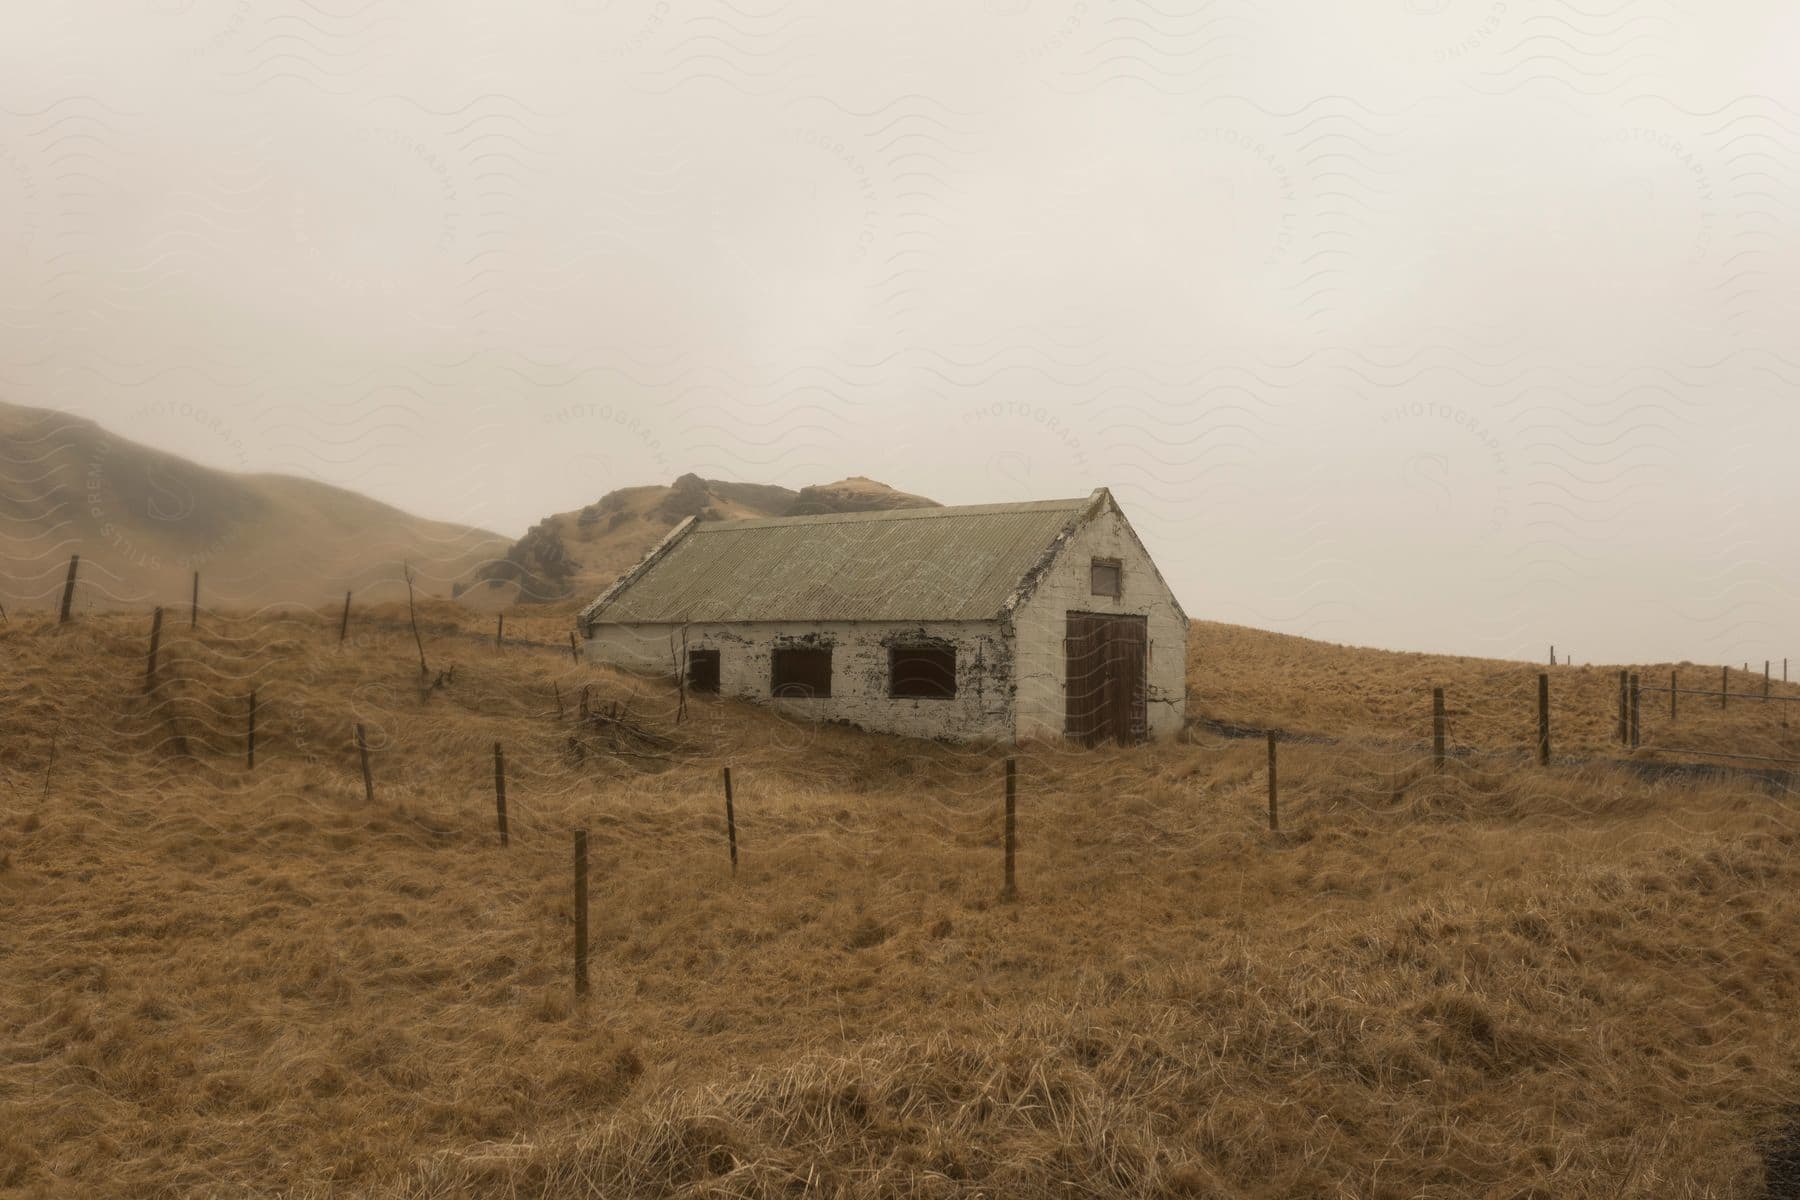 An old barn on a hillside covered in brown dead grass surrounded by fence posts